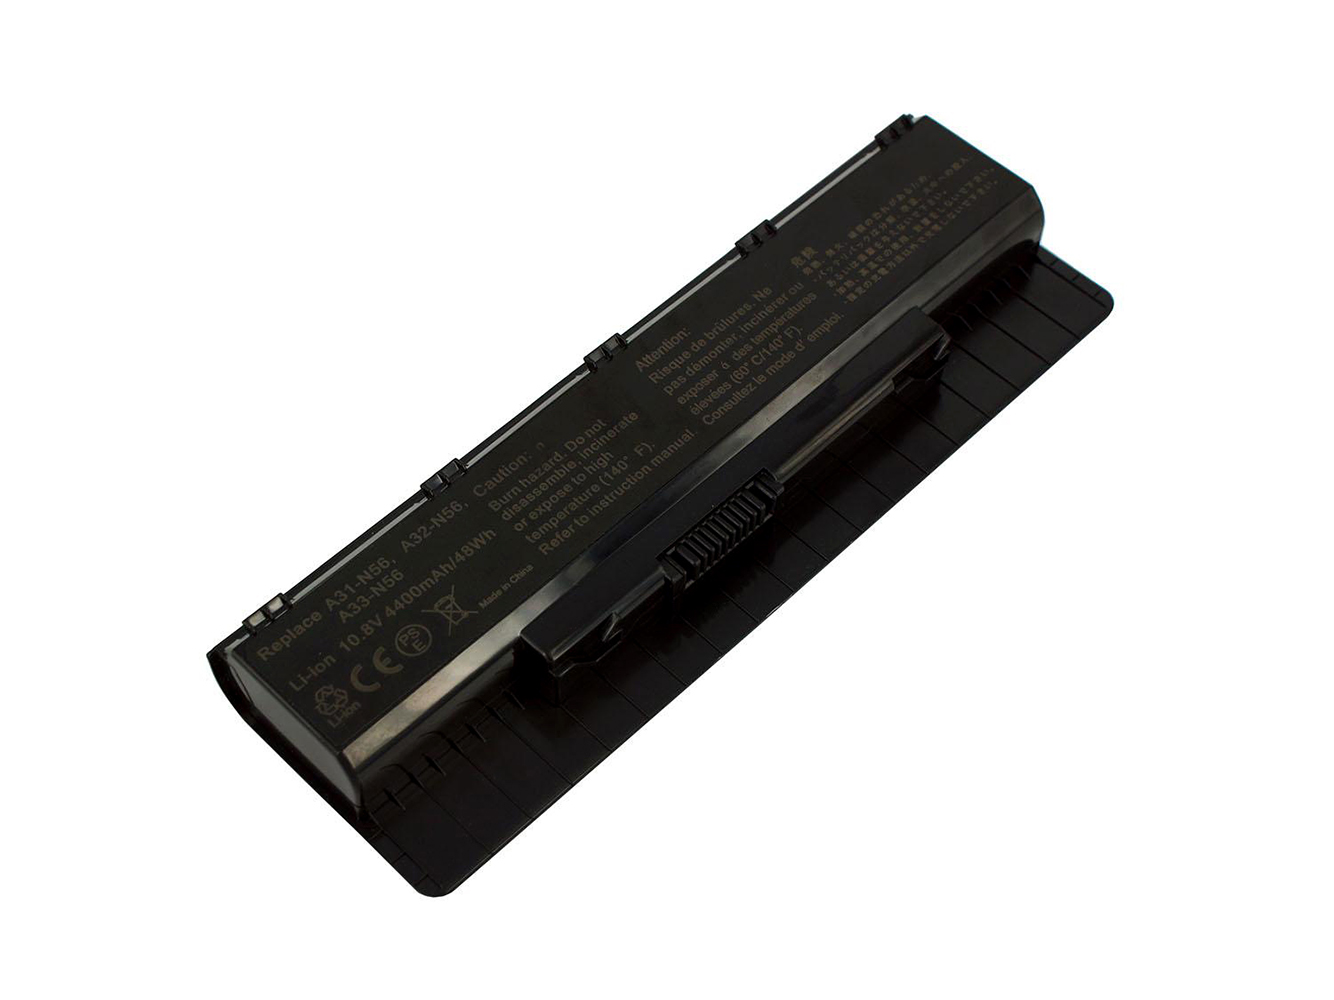 A31-N56 replacement Laptop Battery for Asus N46 Series, N46V Series, 6 cells, 4400mAh, 10.80V